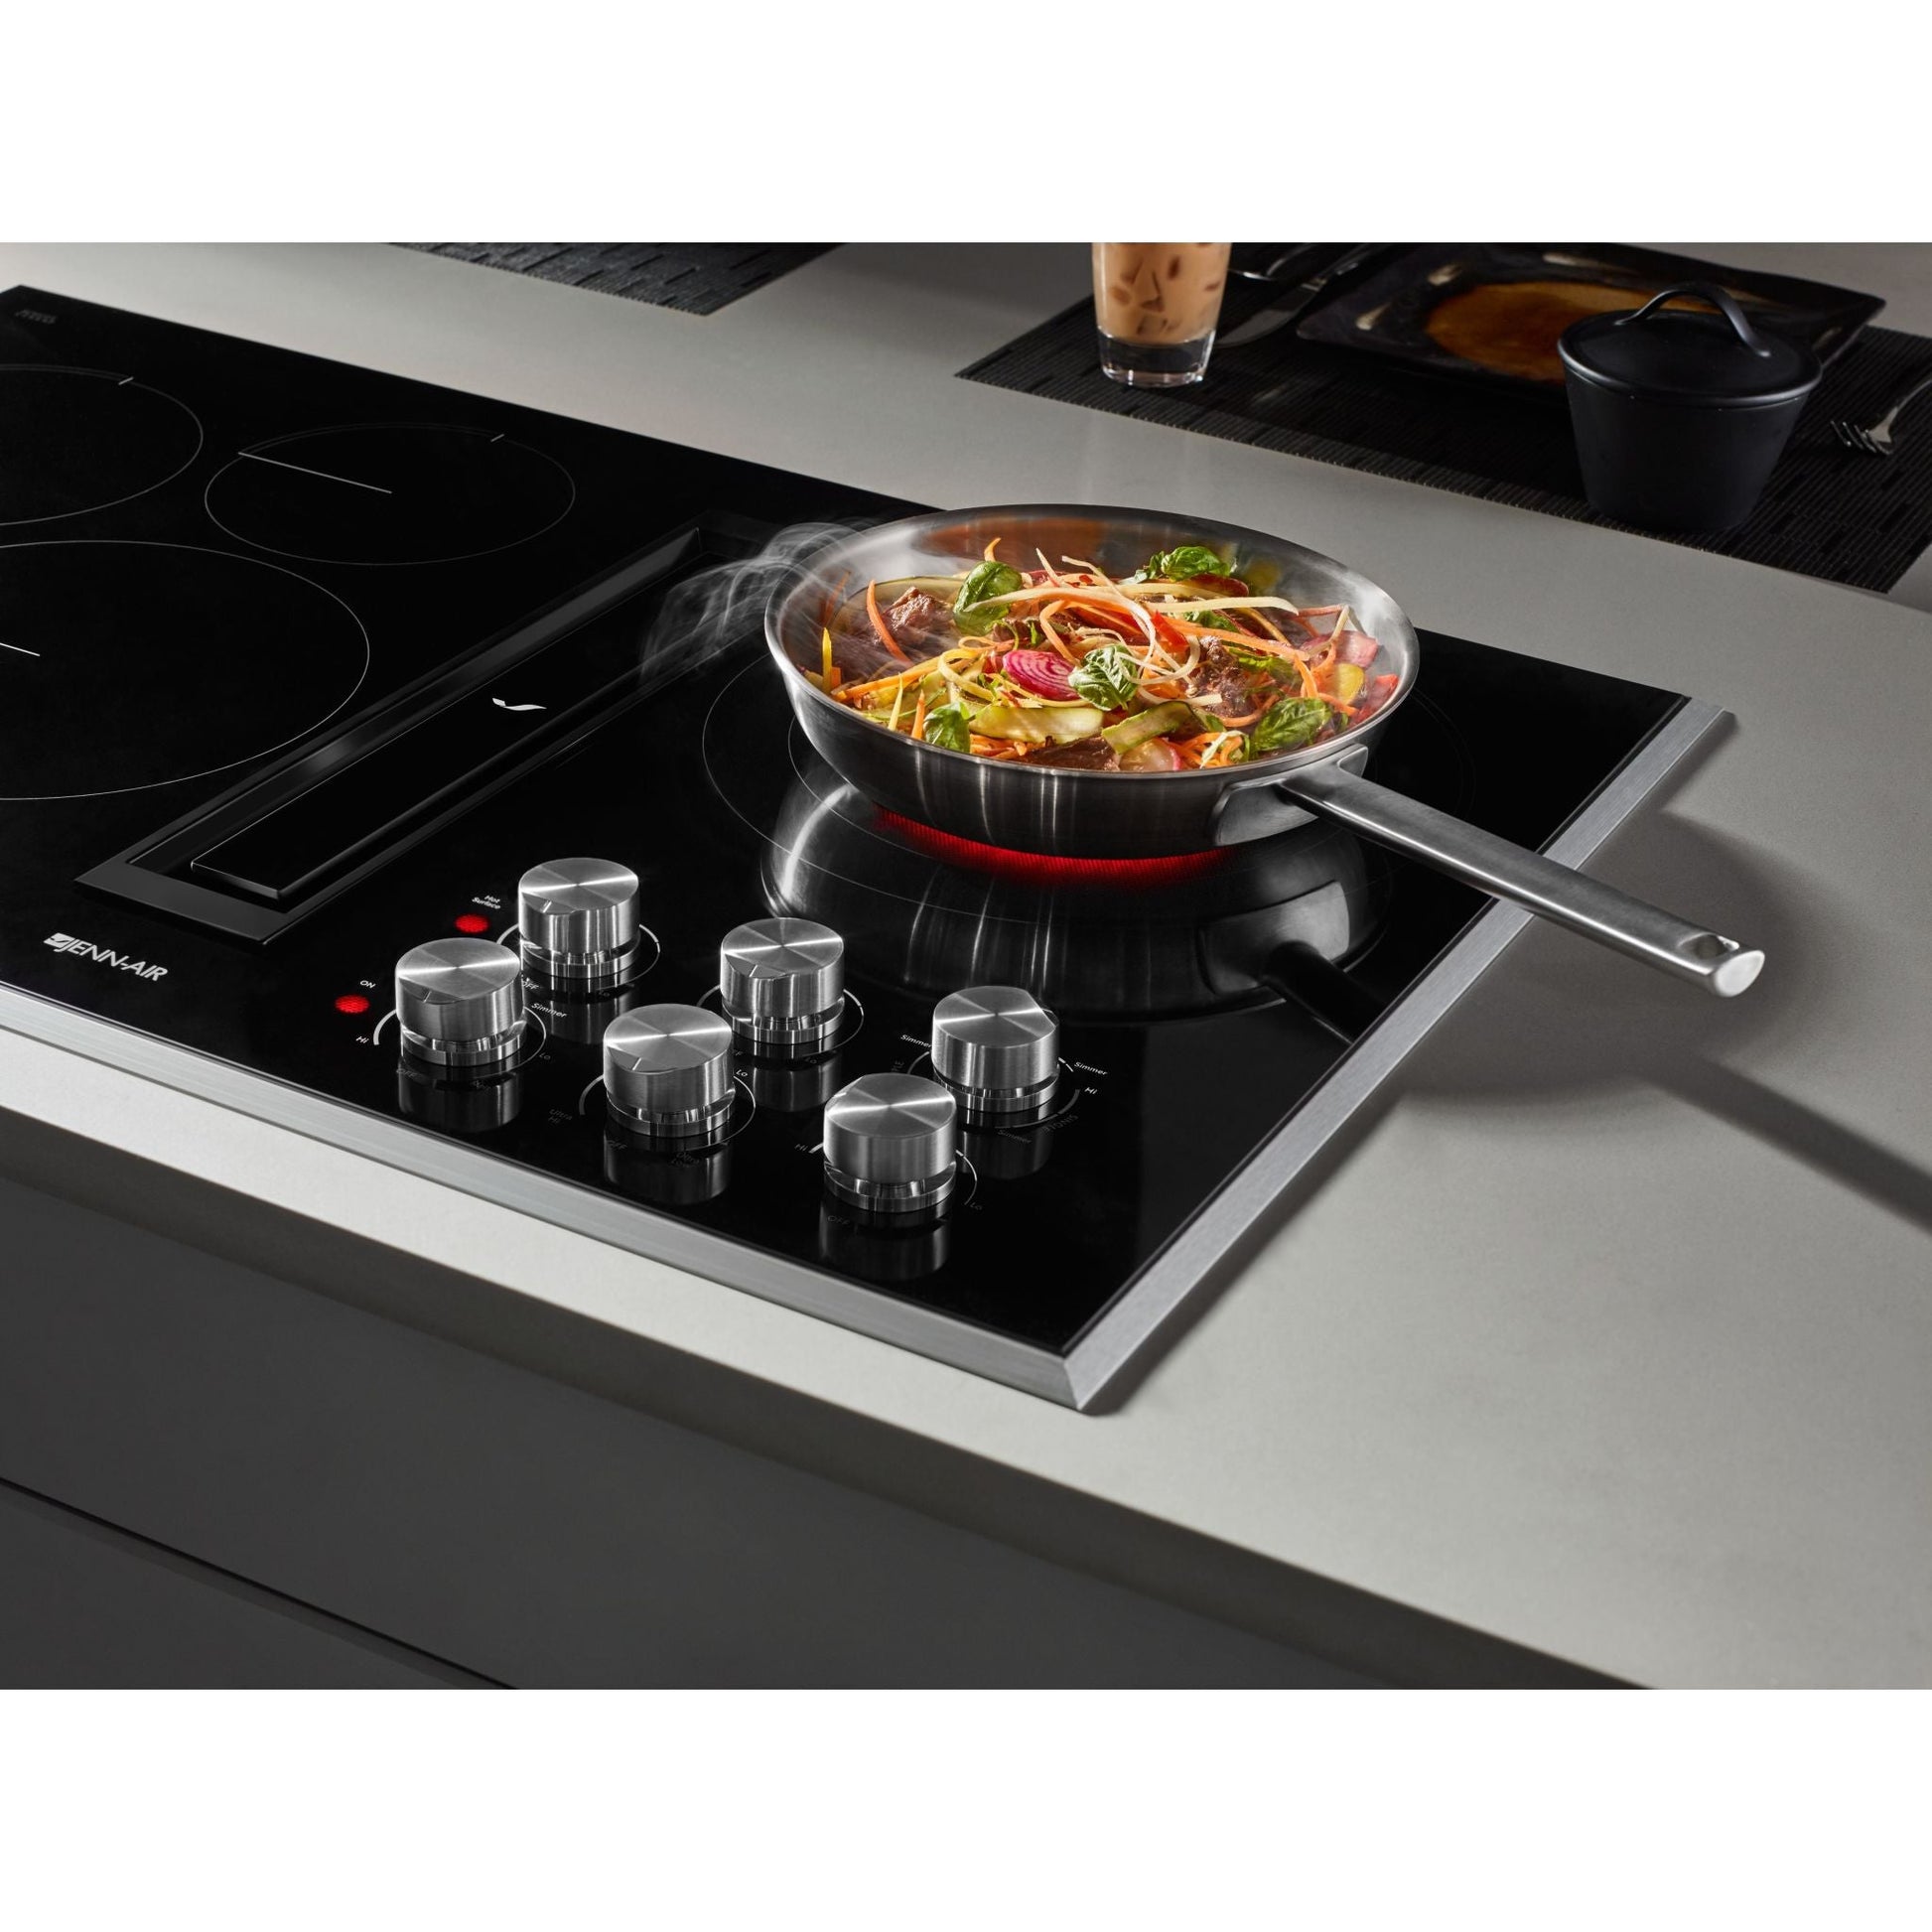 JennAir 36" Cooktop (JED3536GS) - Stainless Steel